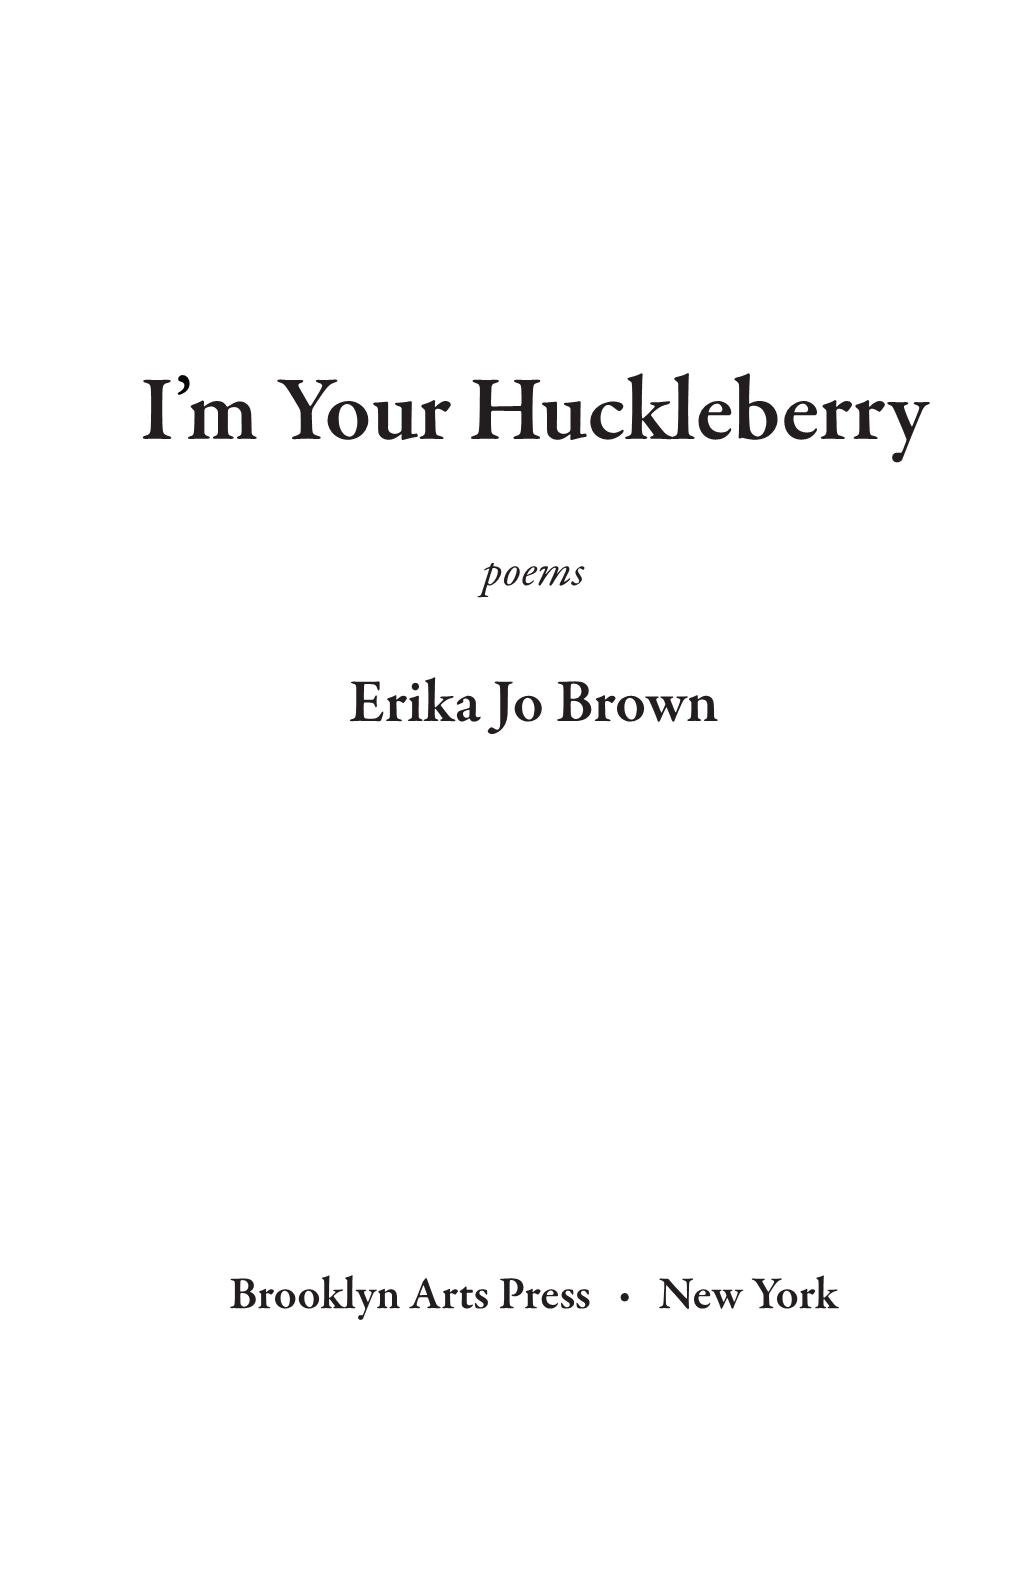 I'm Your Huckleberry / by Erika Jo Brown